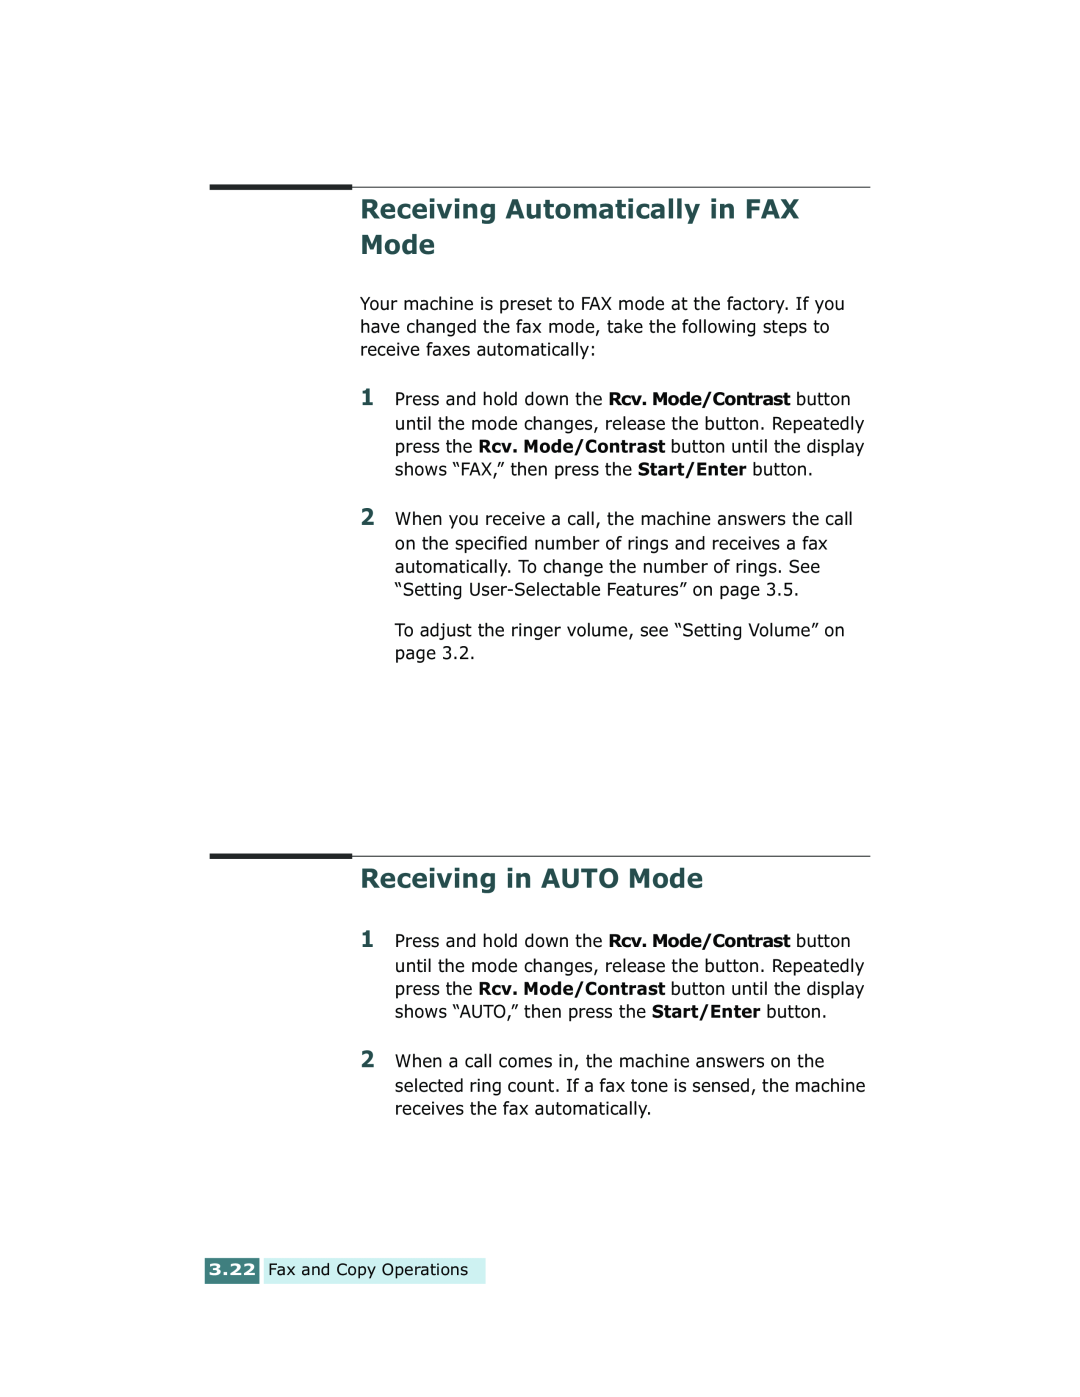 Xerox Pro 580 manual Receiving Automatically in FAX Mode, Receiving in AUTO Mode 